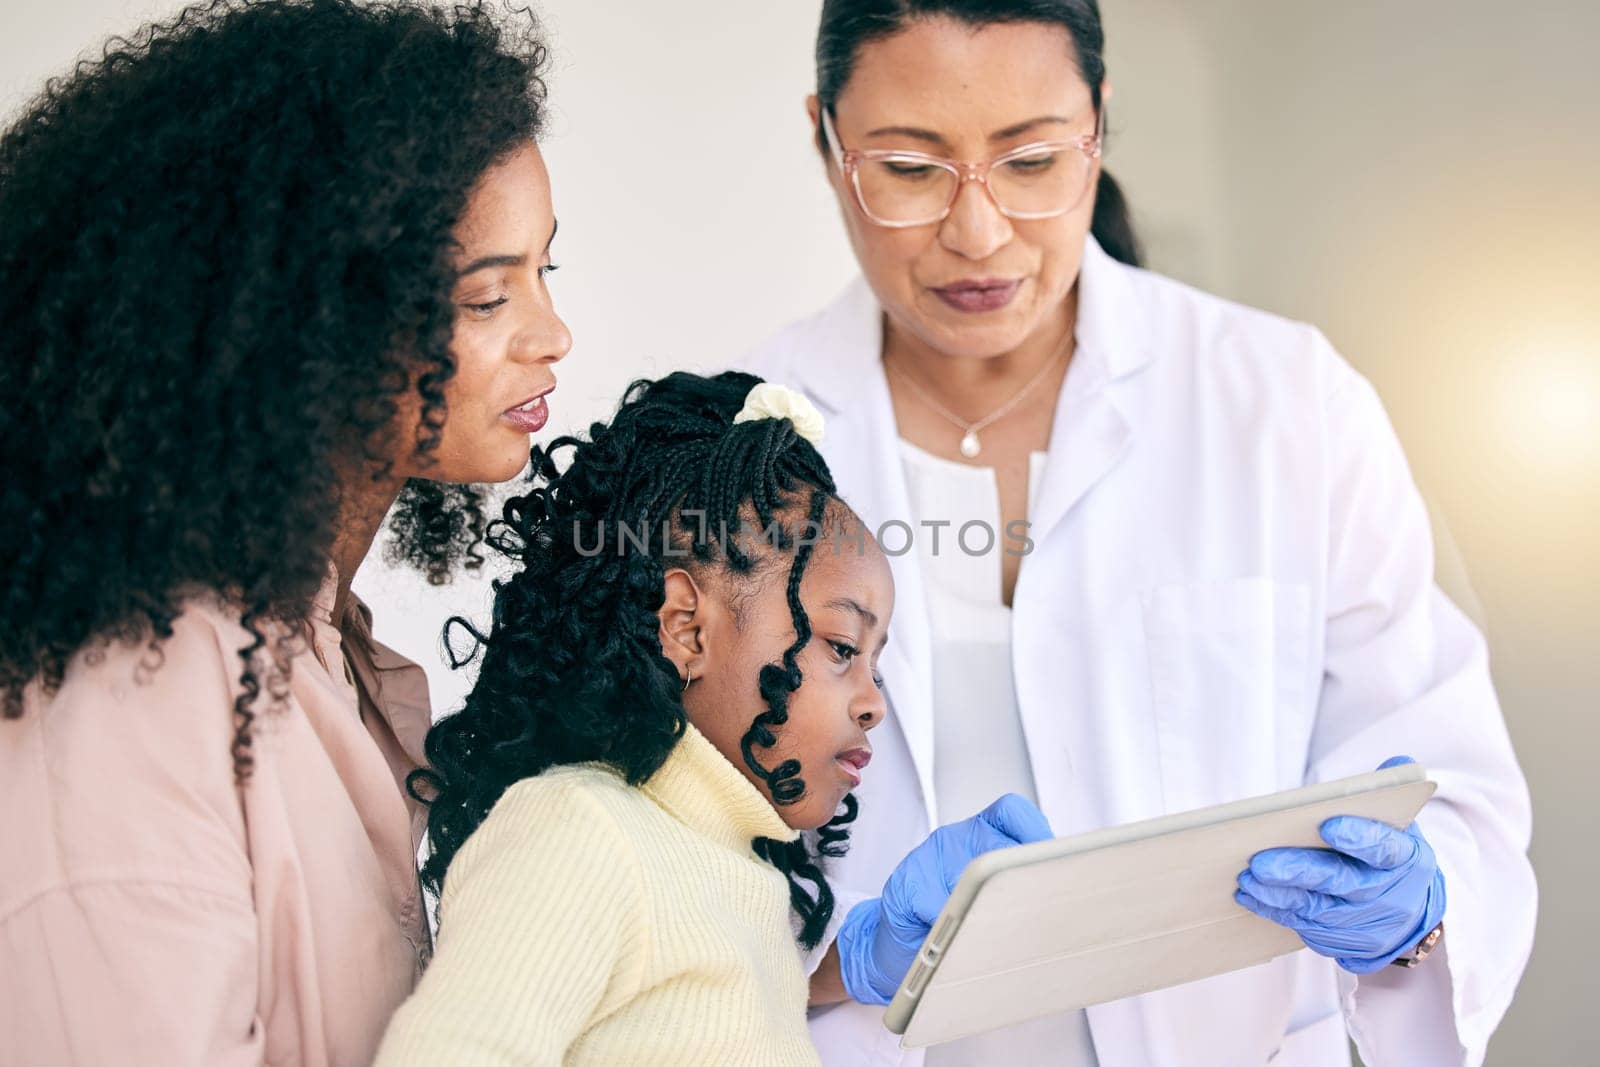 Tablet, healthcare and doctor with a mother and child in discussion on test results in the hospital. Professional, communication and female medical worker on a mobile device with the mom and kid